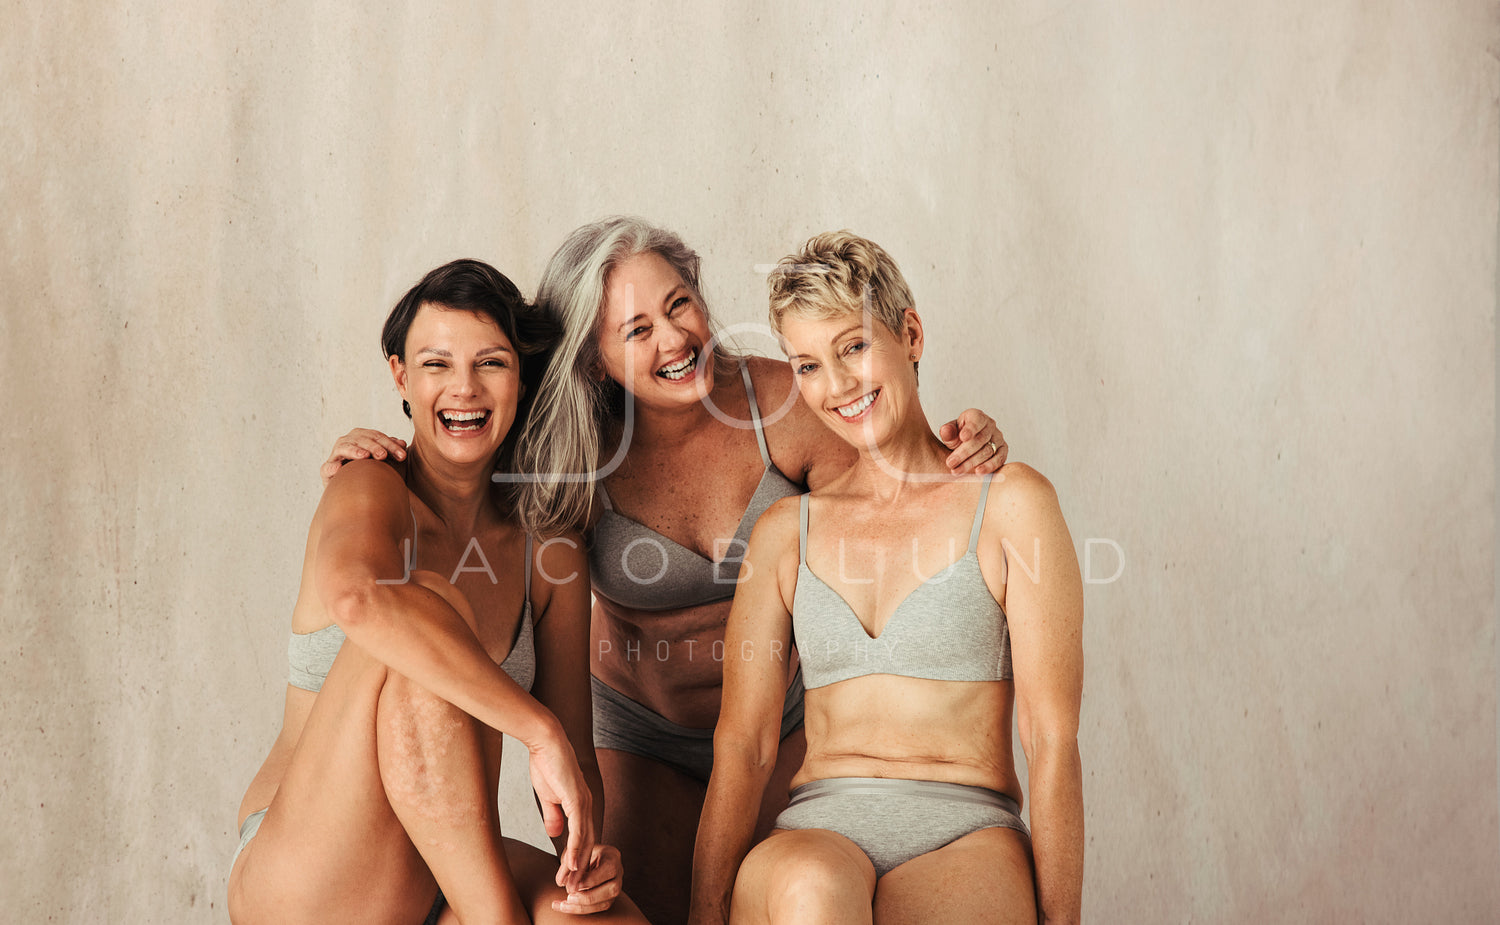 Three happy and confident women embracing their aging bodies